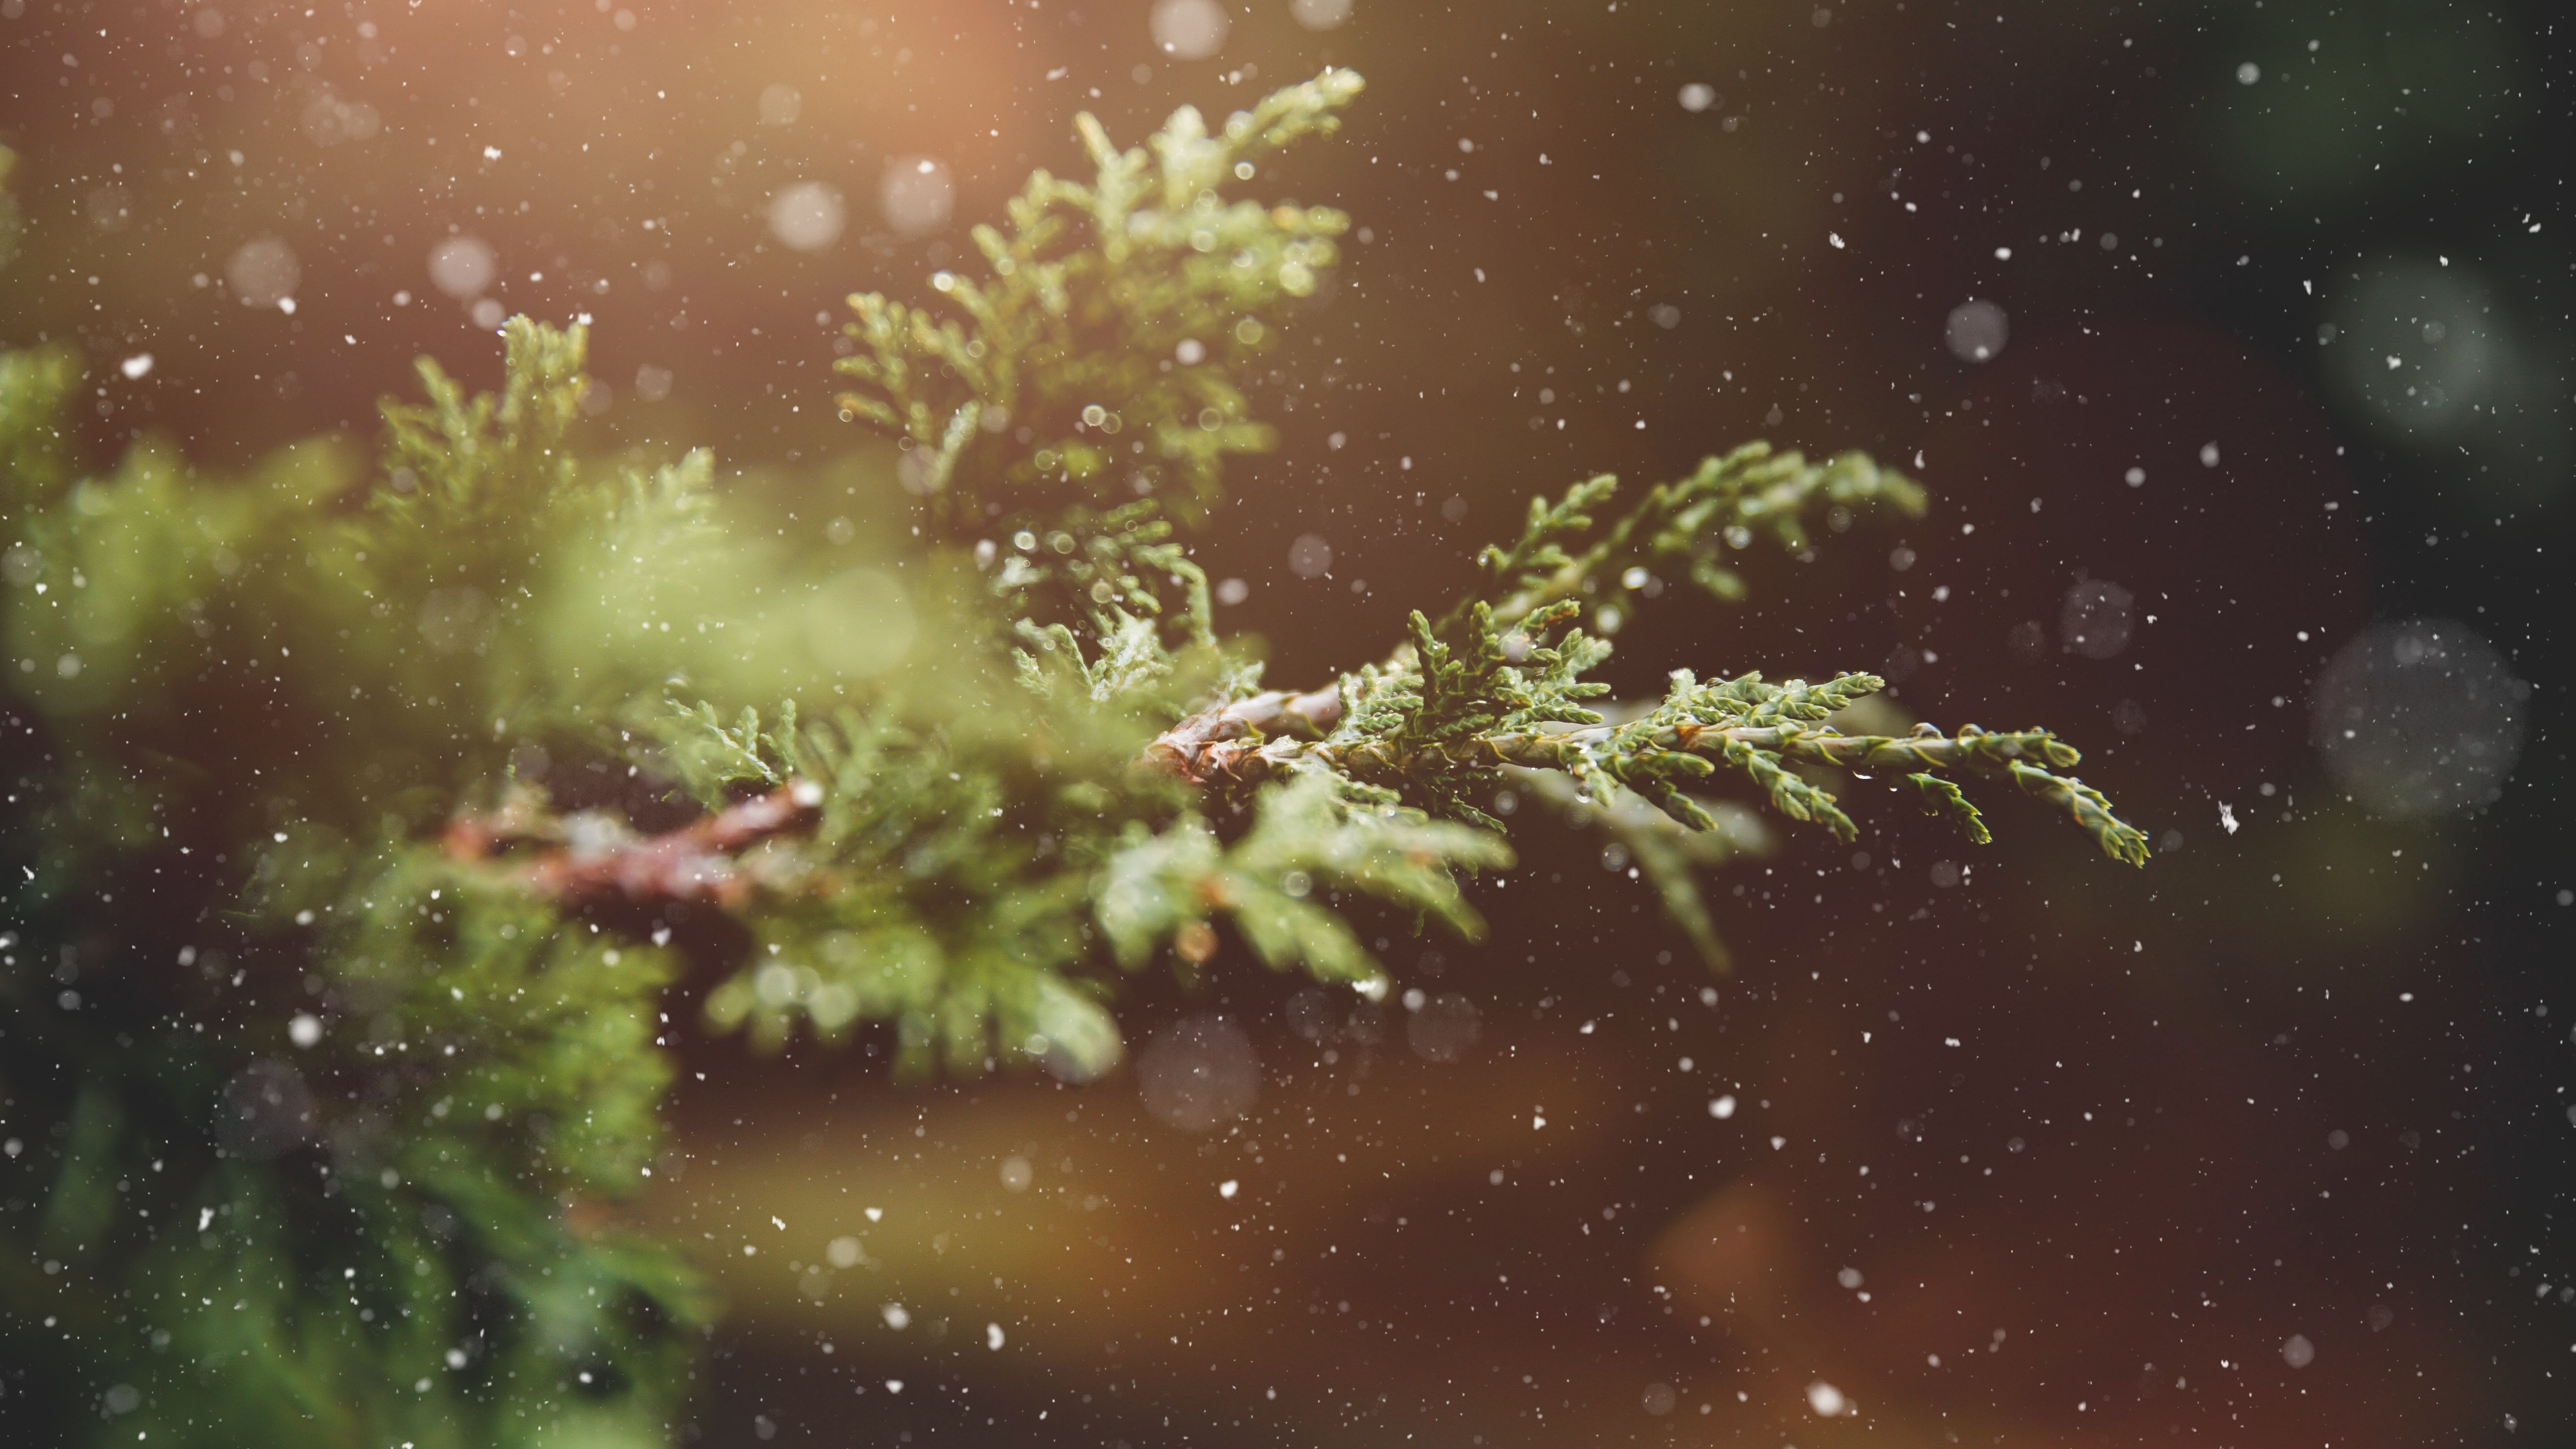 Snowflakes over the pine branch wallpaper 5120x2880